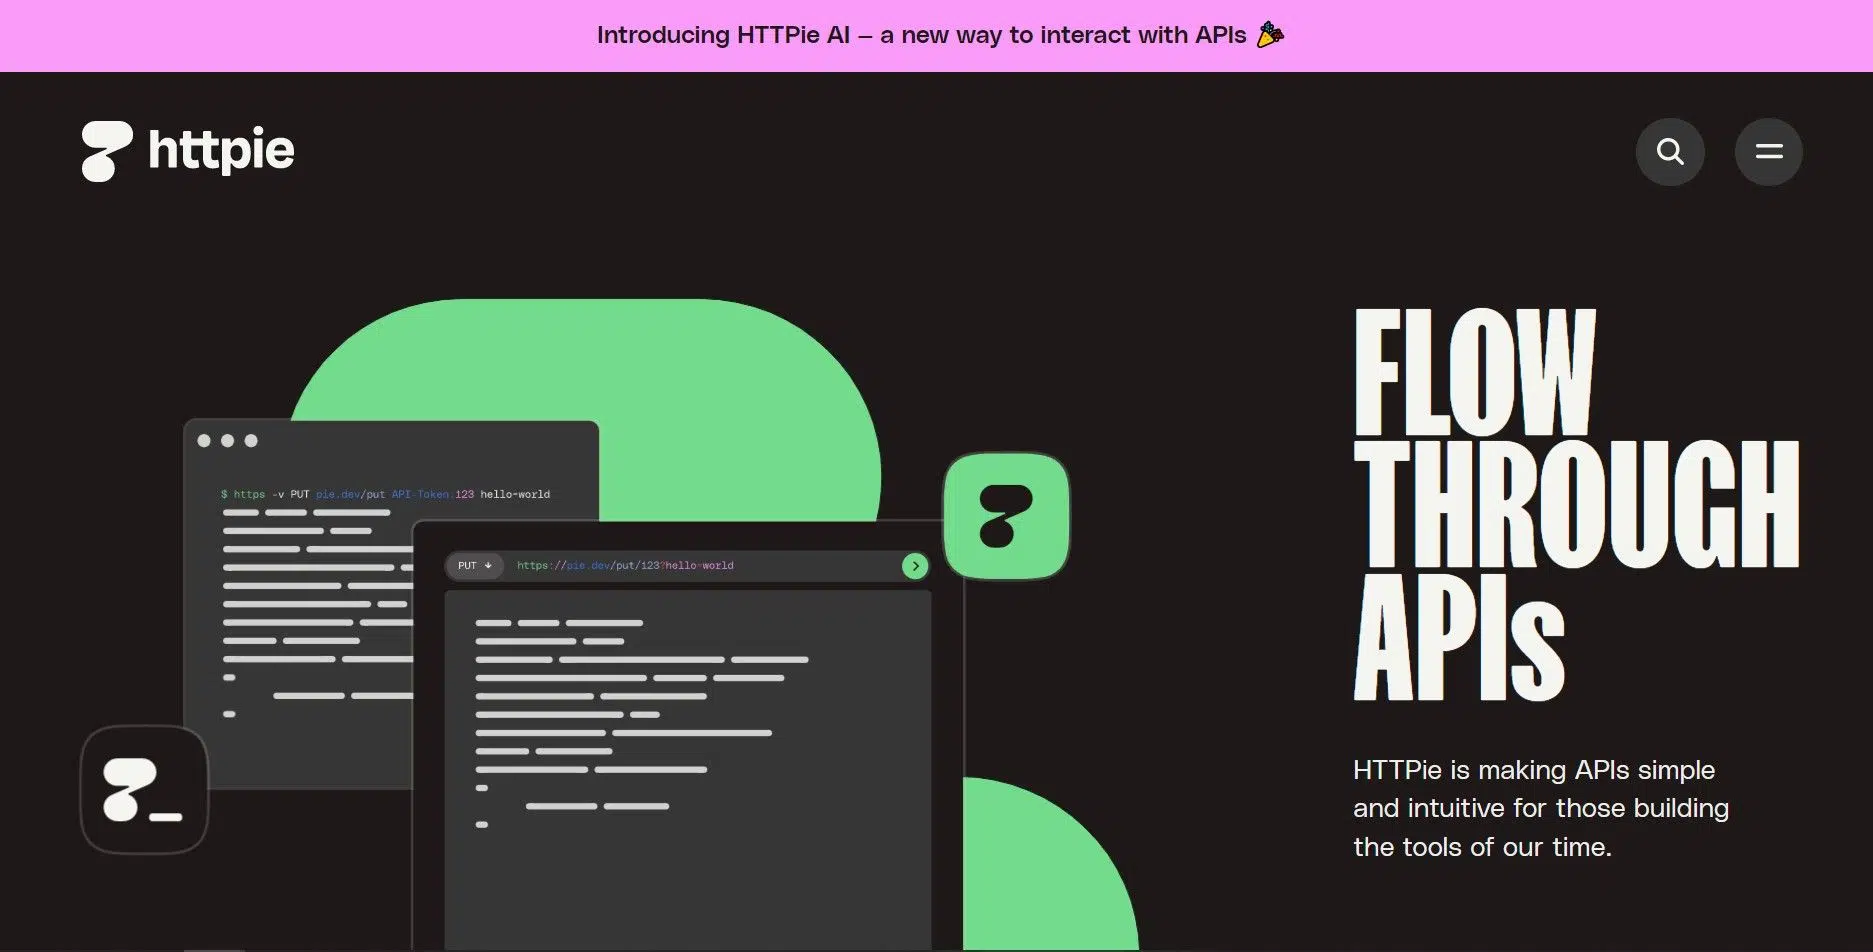 HTTPie AIwebsite picture